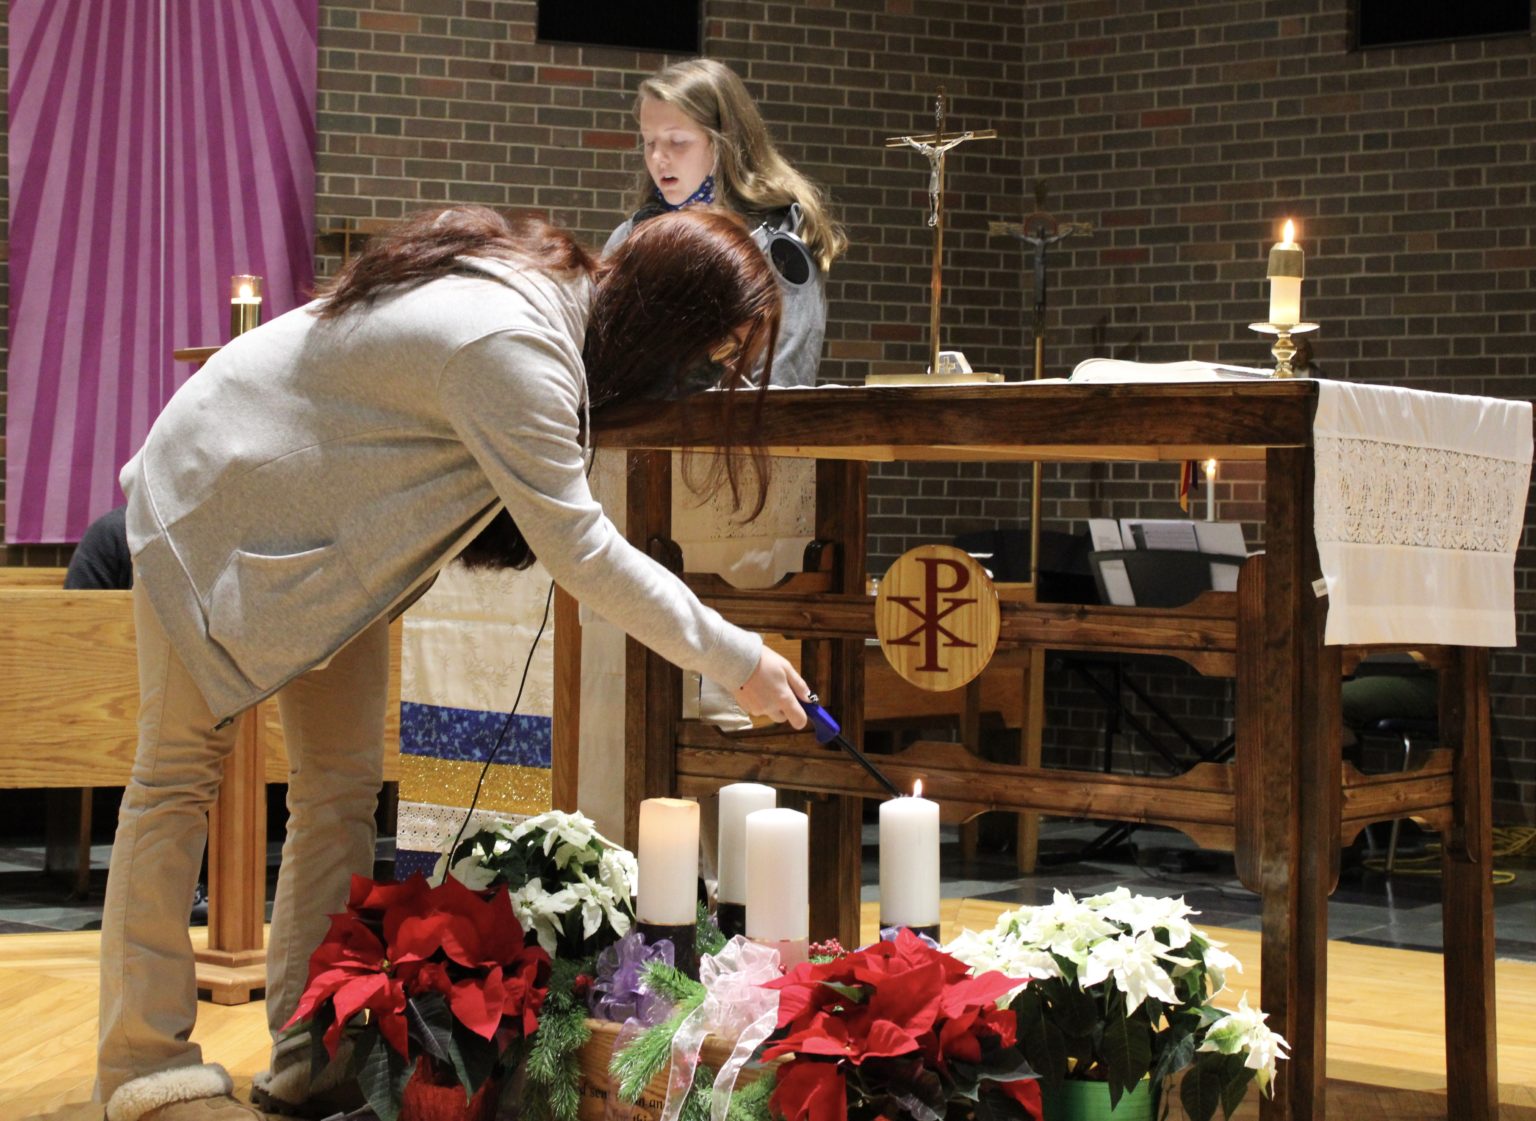 CBA Celebrates The Feast Of The Immaculate Conception near syracuse ny image of students lighting candles